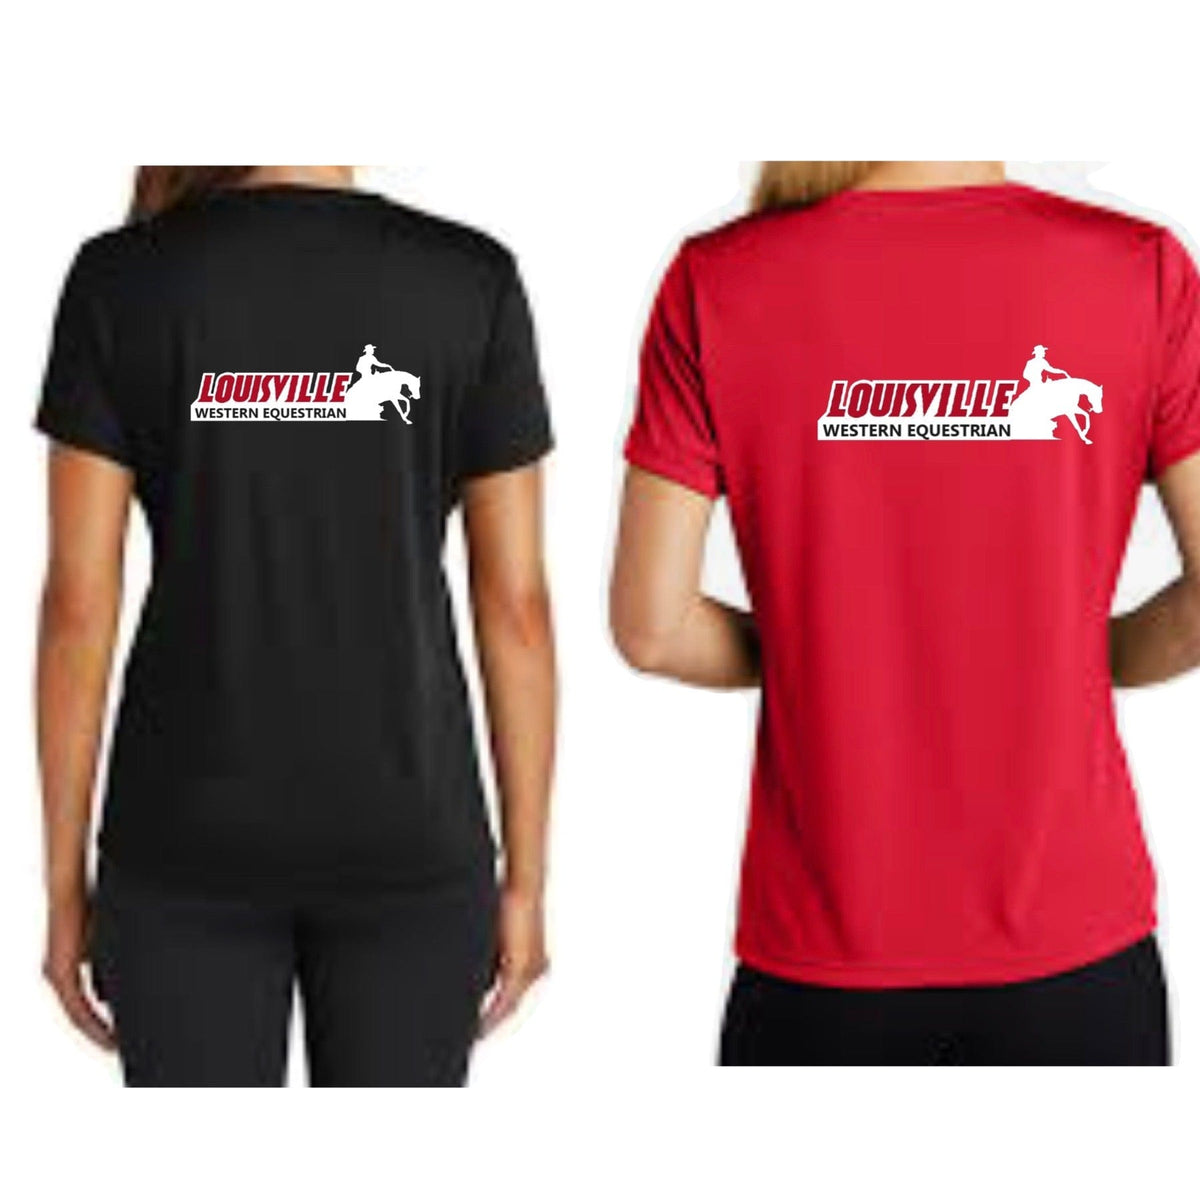 Equestrian Team Apparel Louisville Western Equestrian Seat Dry fit Tee equestrian team apparel online tack store mobile tack store custom farm apparel custom show stable clothing equestrian lifestyle horse show clothing riding clothes horses equestrian tack store